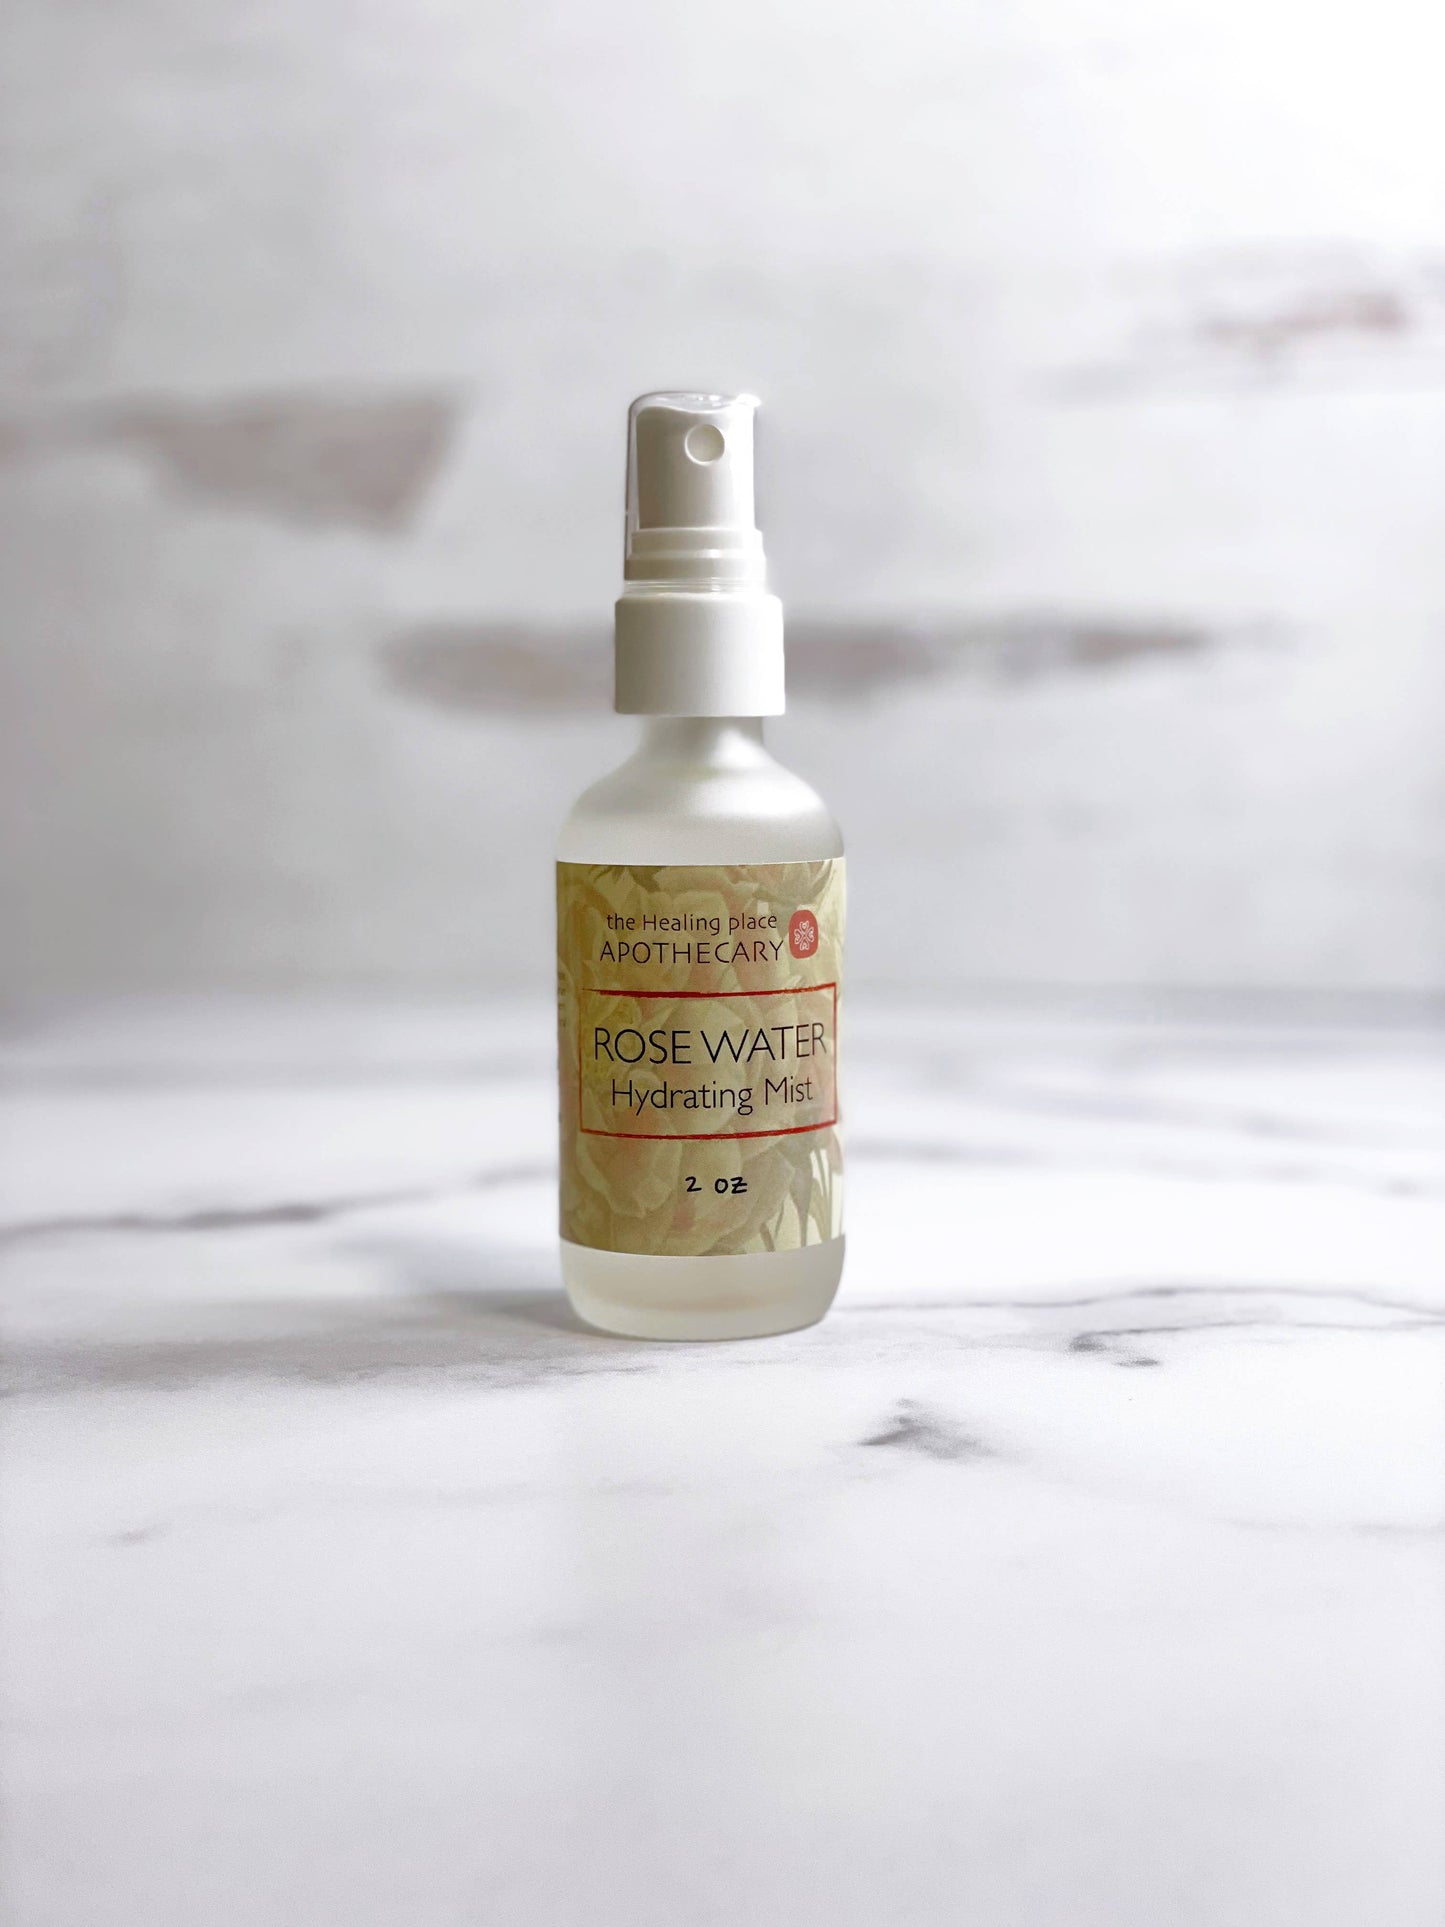 Rose water hydrating mist